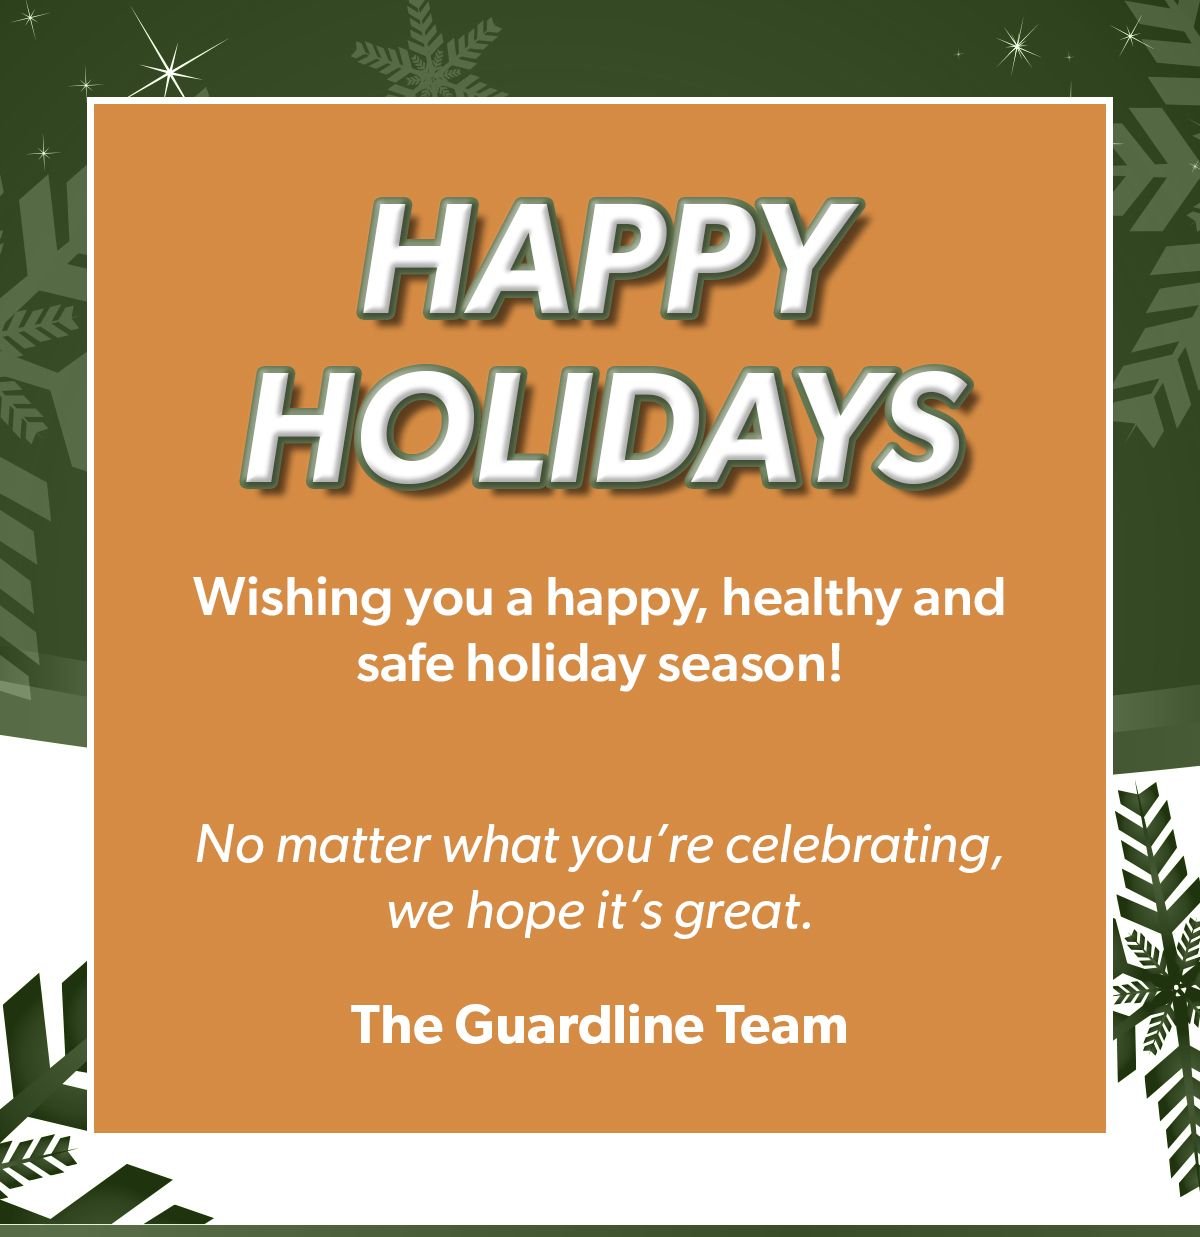 Happy holidays! Wishing you a happy, healthy and safe holiday season! No matter what you're celebrating, we hope it's great. The Guardline Team